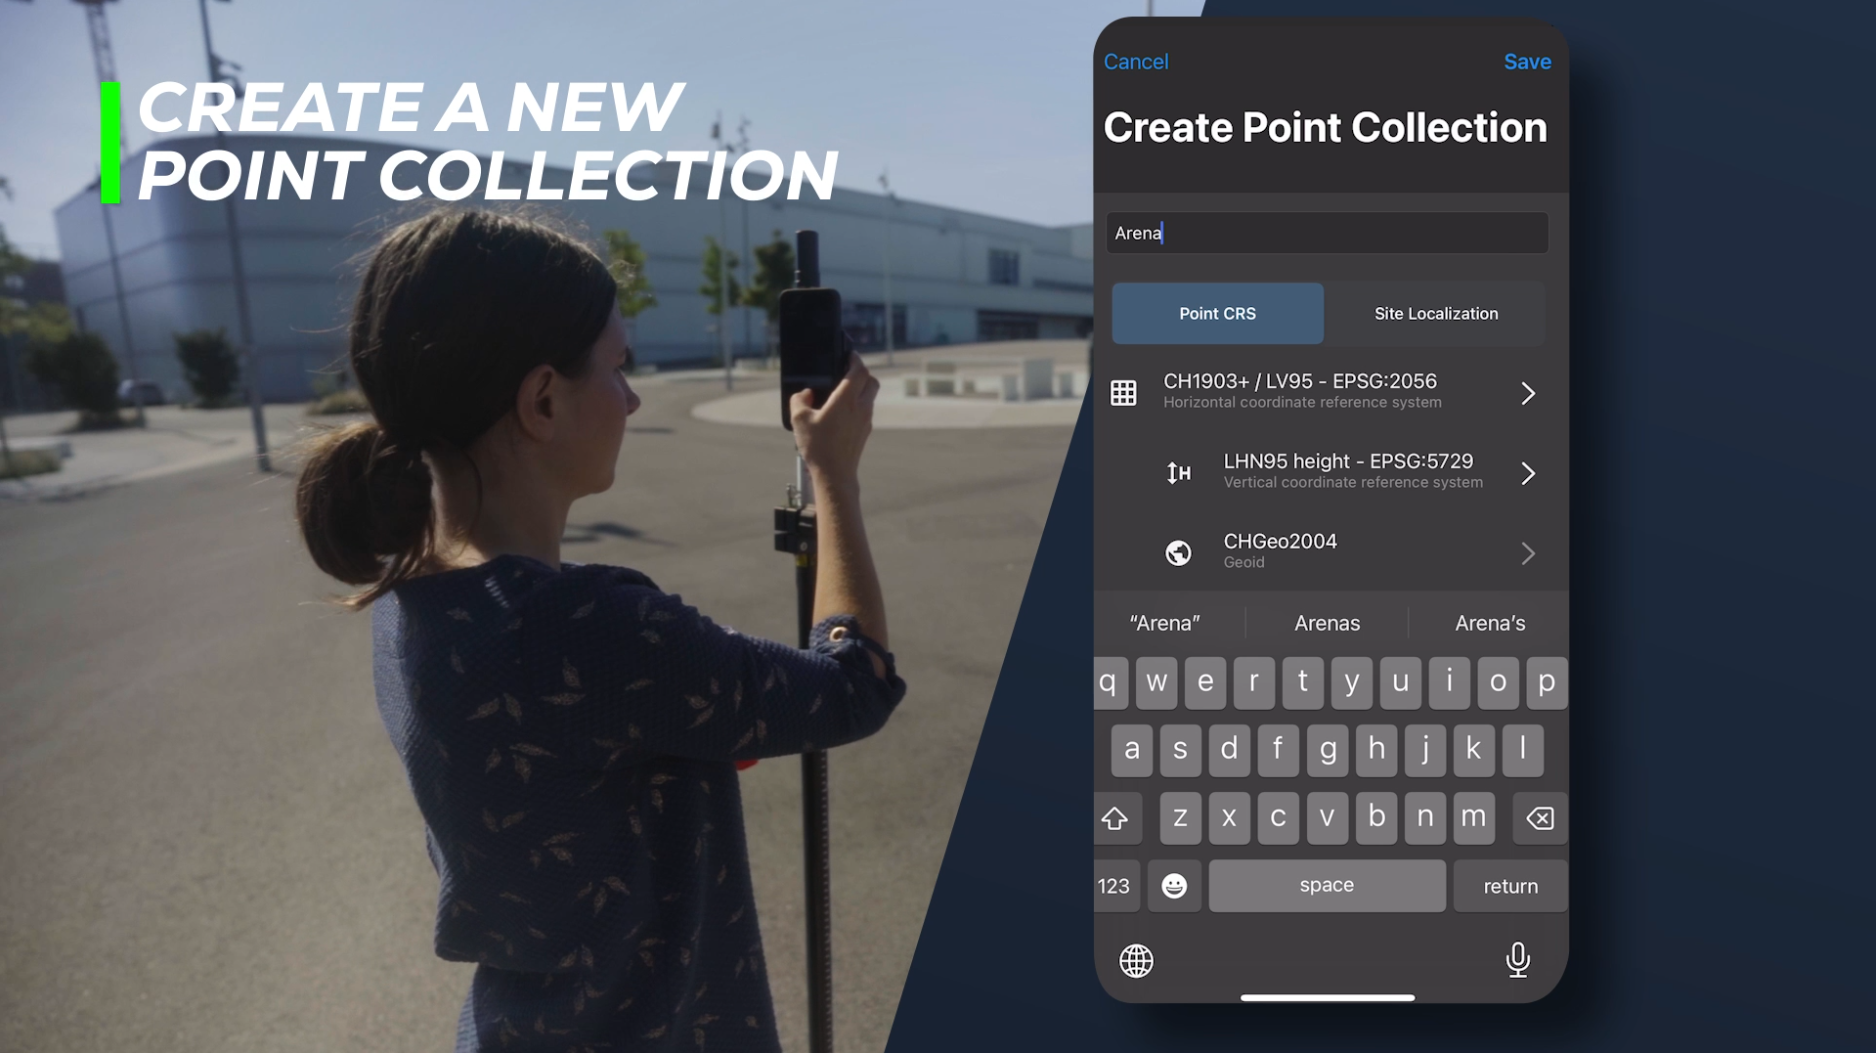 Create a new Point Collection